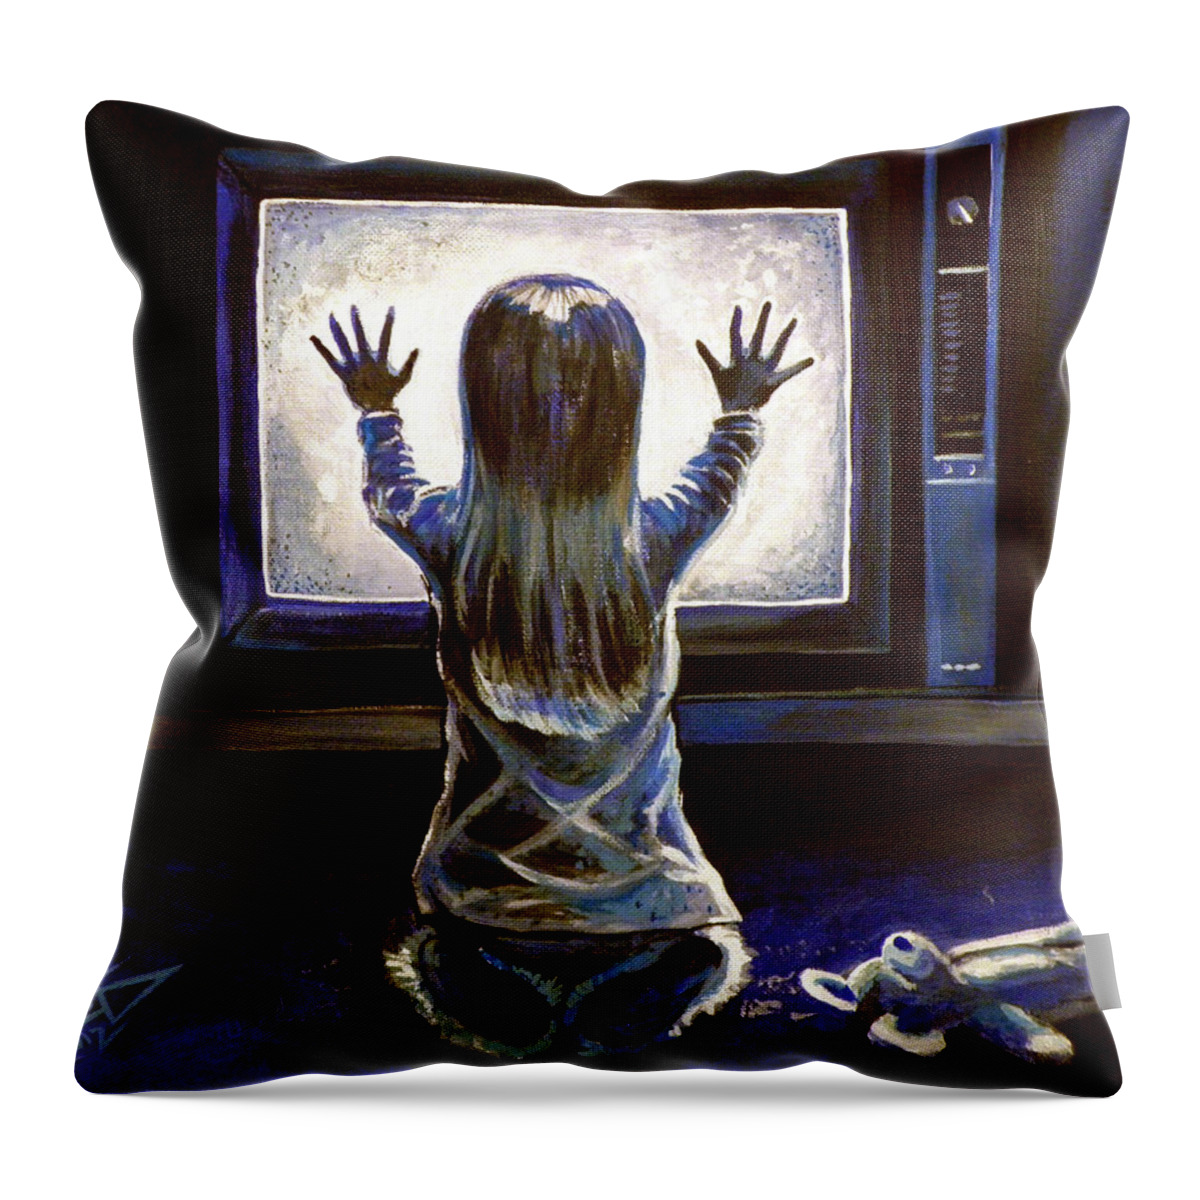 Poltergeist Throw Pillow featuring the painting Poltergeist by Tom Carlton